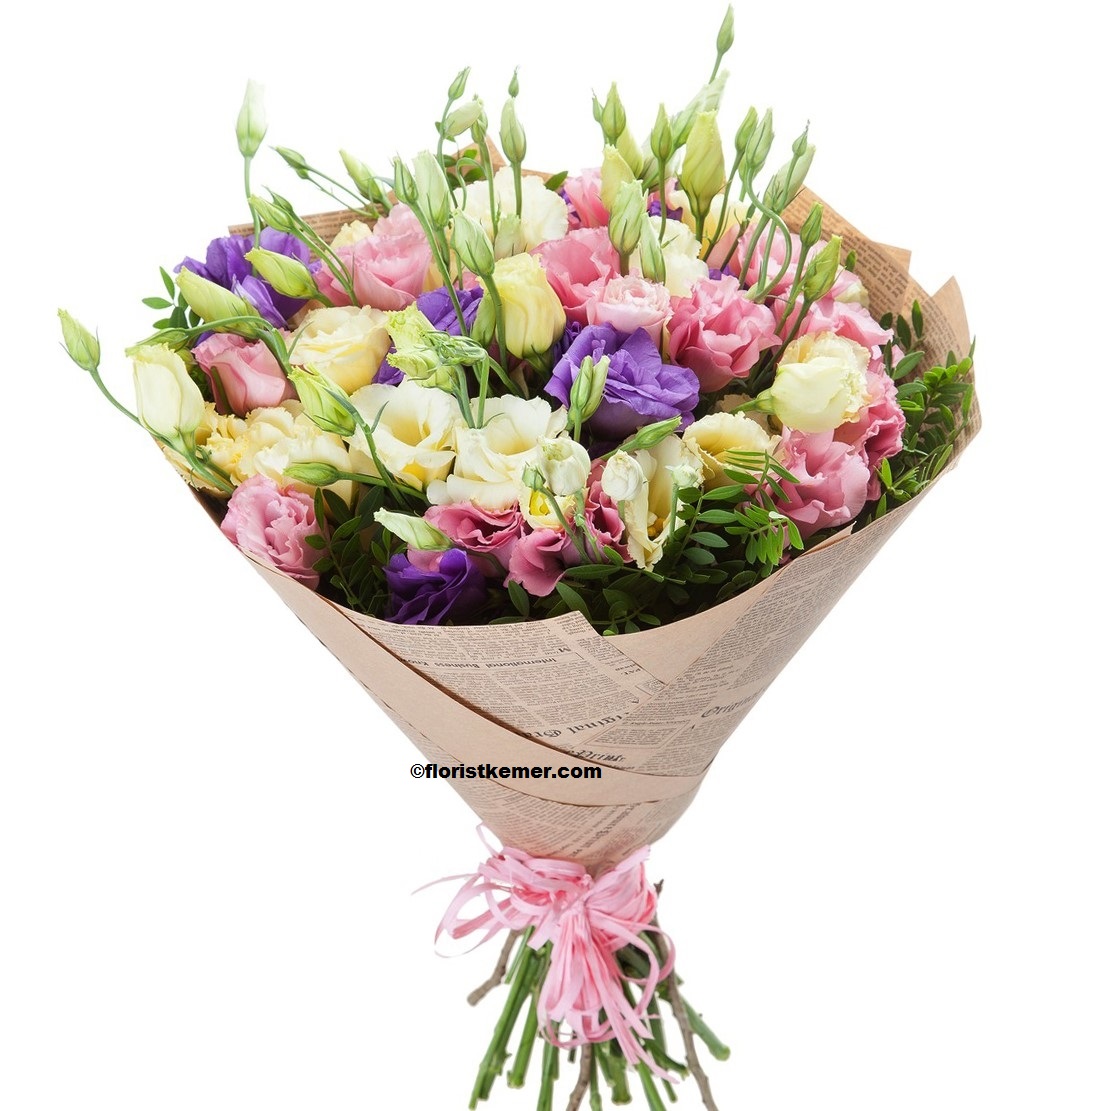  Kemer Flower Delivery Lisianthus Bouquet